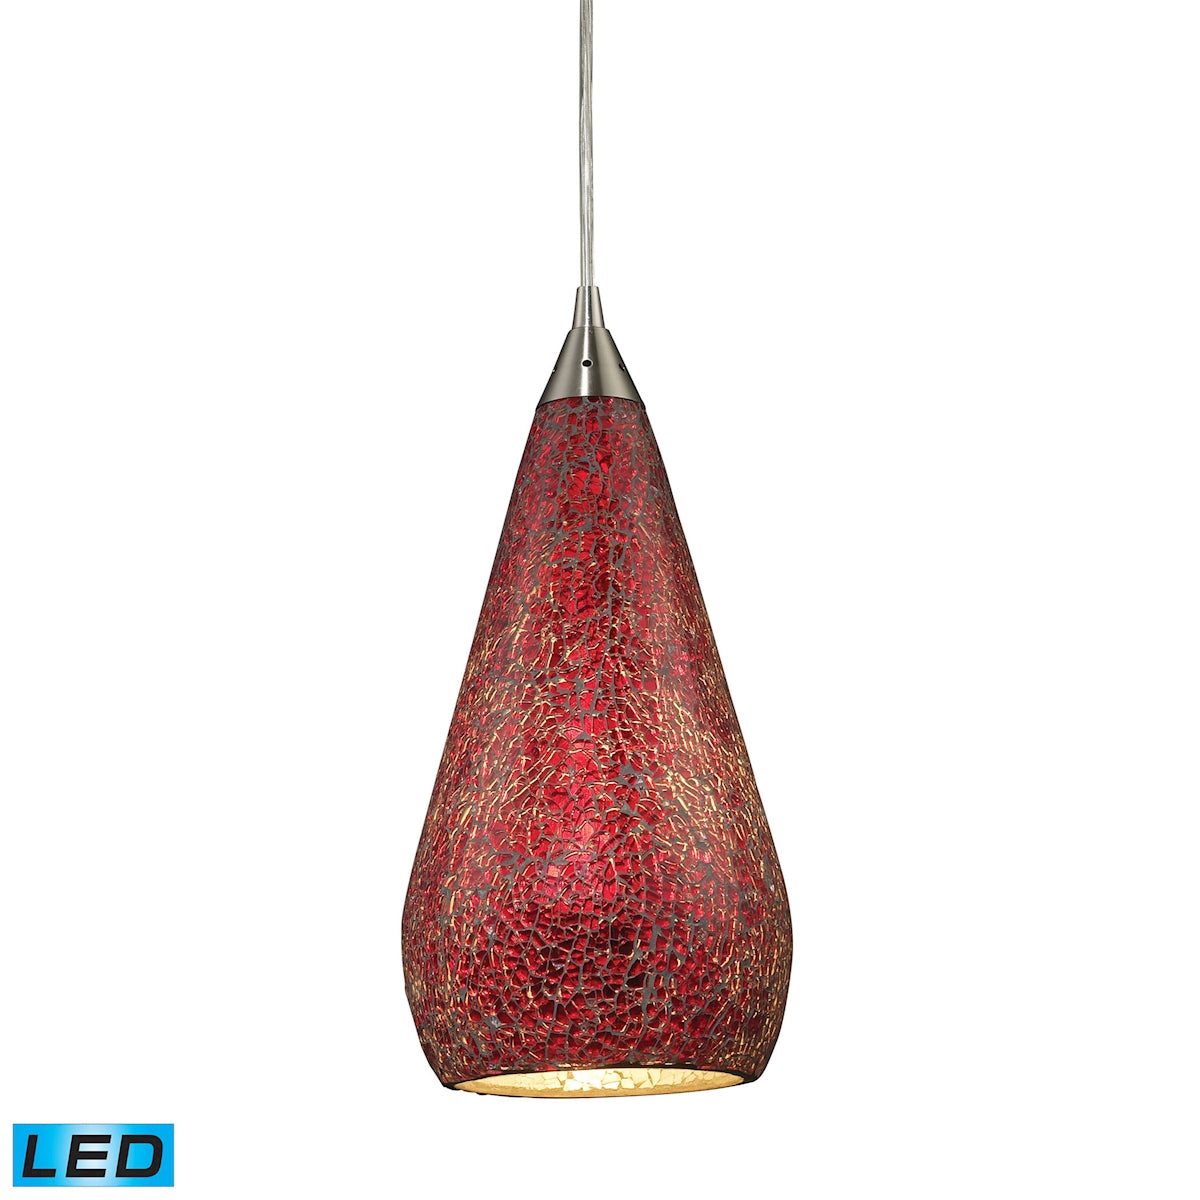 ELK Lighting 546-1RBY-CRC-LED Curvalo 1-Light Mini Pendant in Satin Nickel with Ruby Crackle Glass - Includes LED Bulb